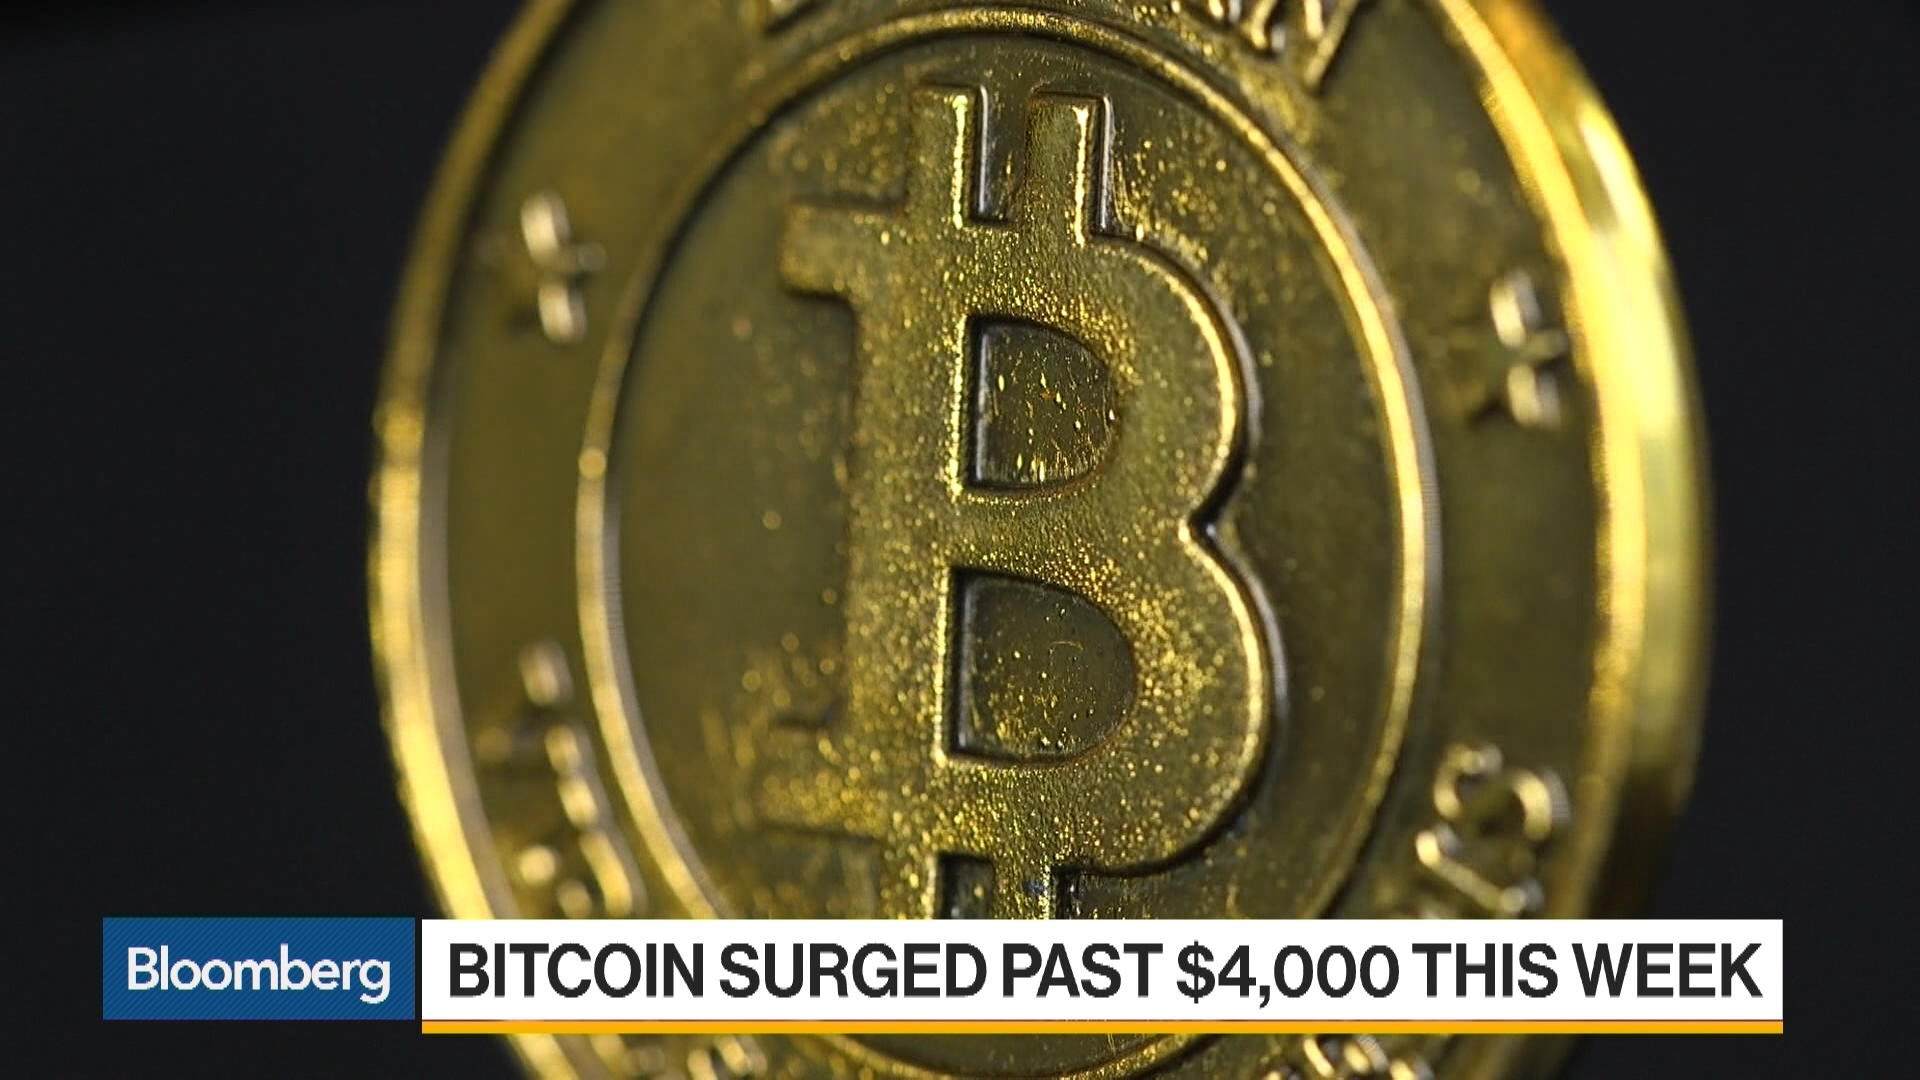 https://www.bloomberg.com/news/videos/2017-08-18/bitcoin-s-rally-proving-a-boon-for-china-video